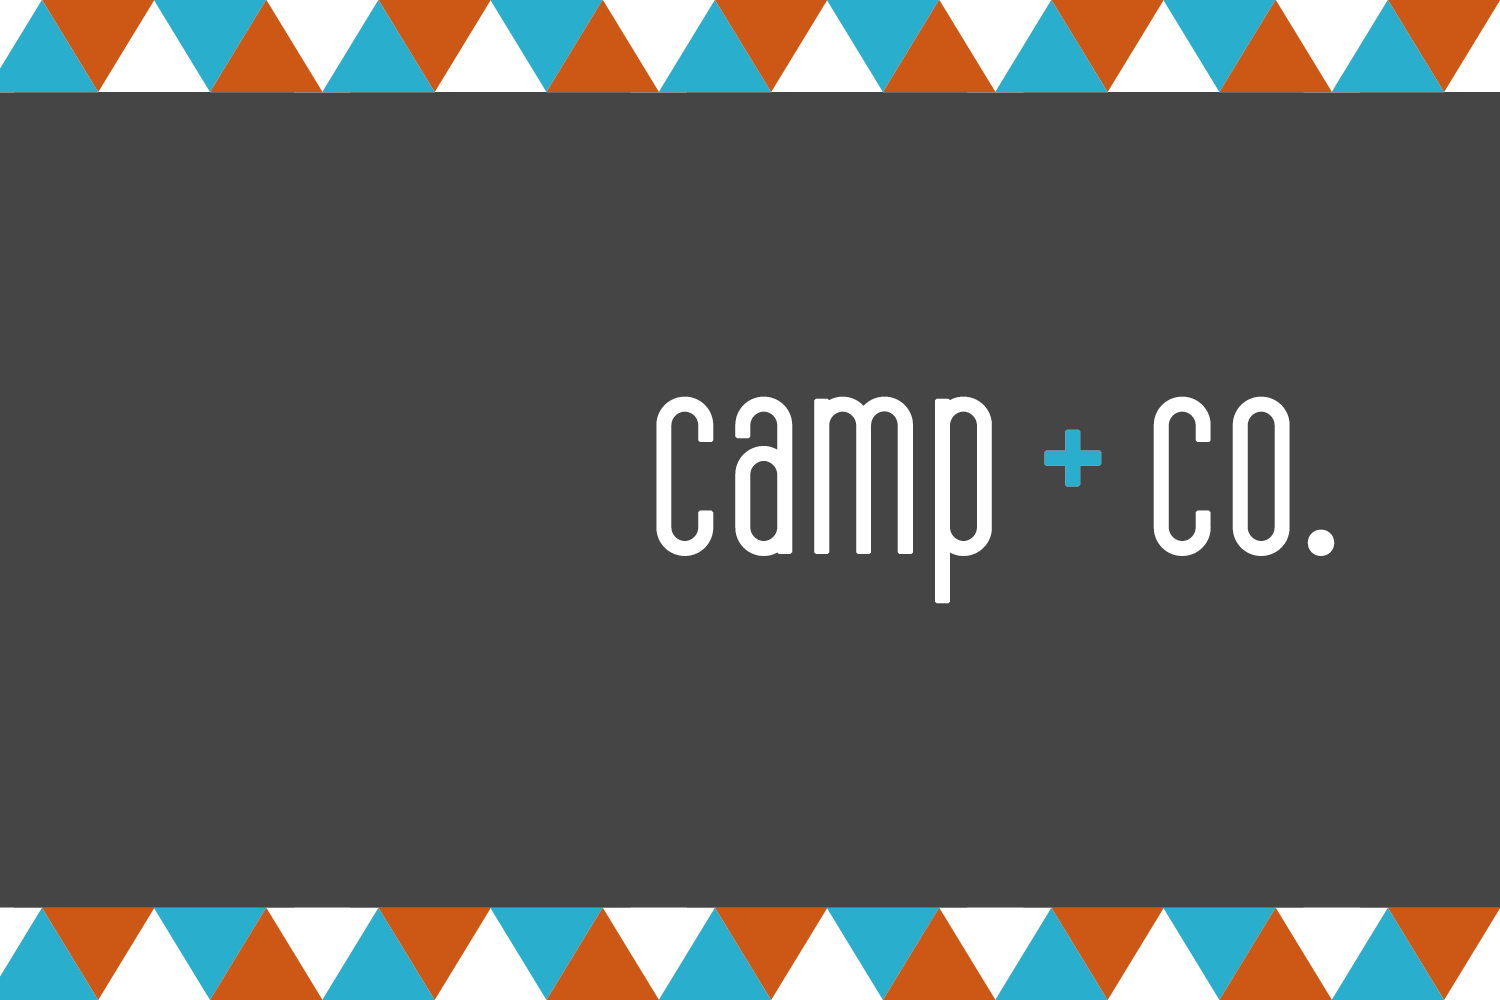 Camp + Co. Facebook Cover Image